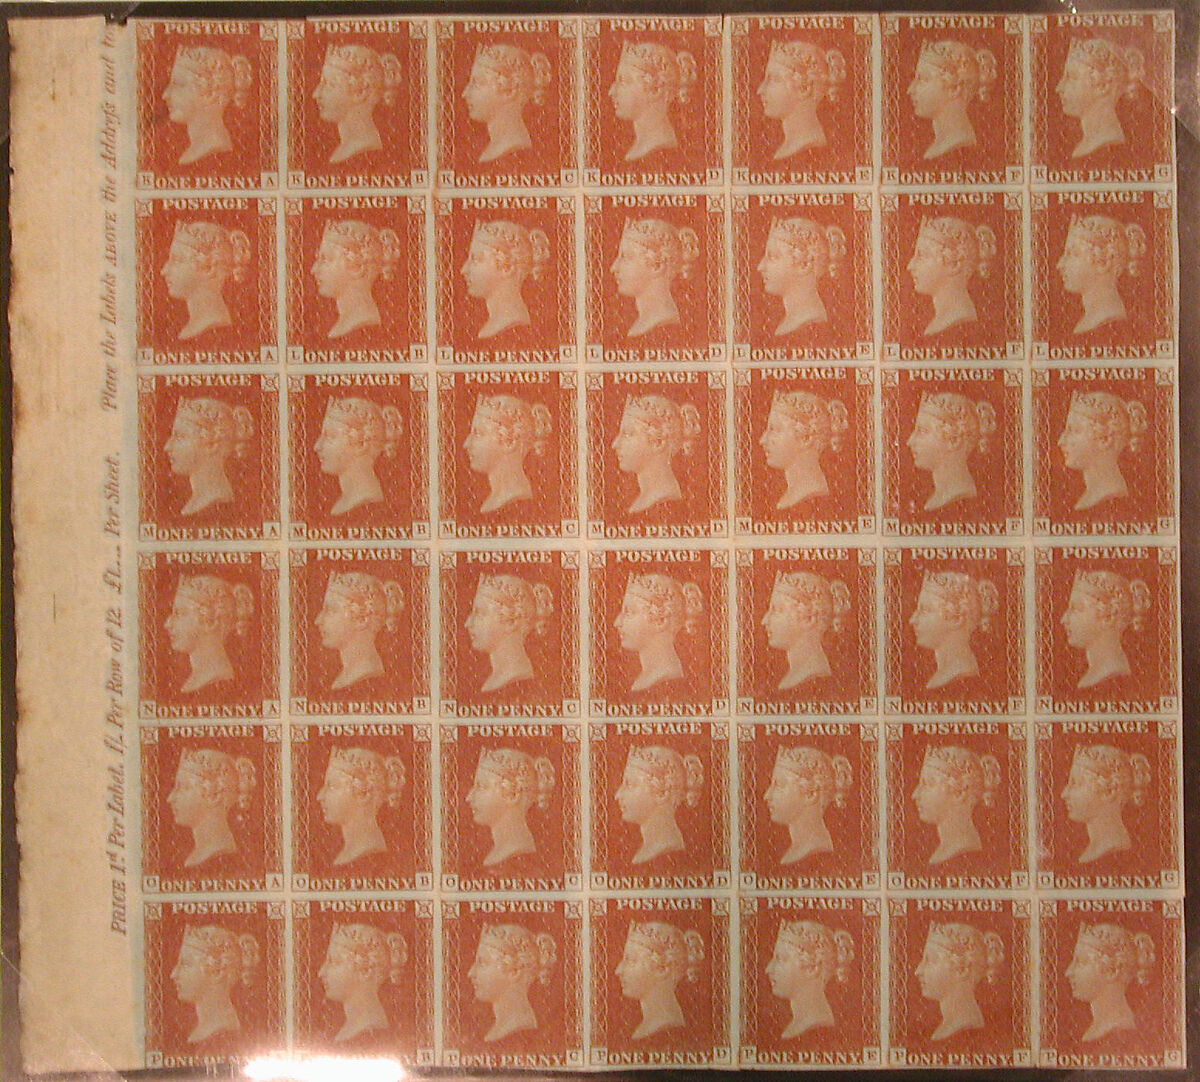 Unused block of forty-two "Penny Red-Brown" postage stamps of Queen Victoria, After a design by William Wyon (British, Birmingham 1795–1851 Brighton), Engraving printed in red-brown ink on paper, British 